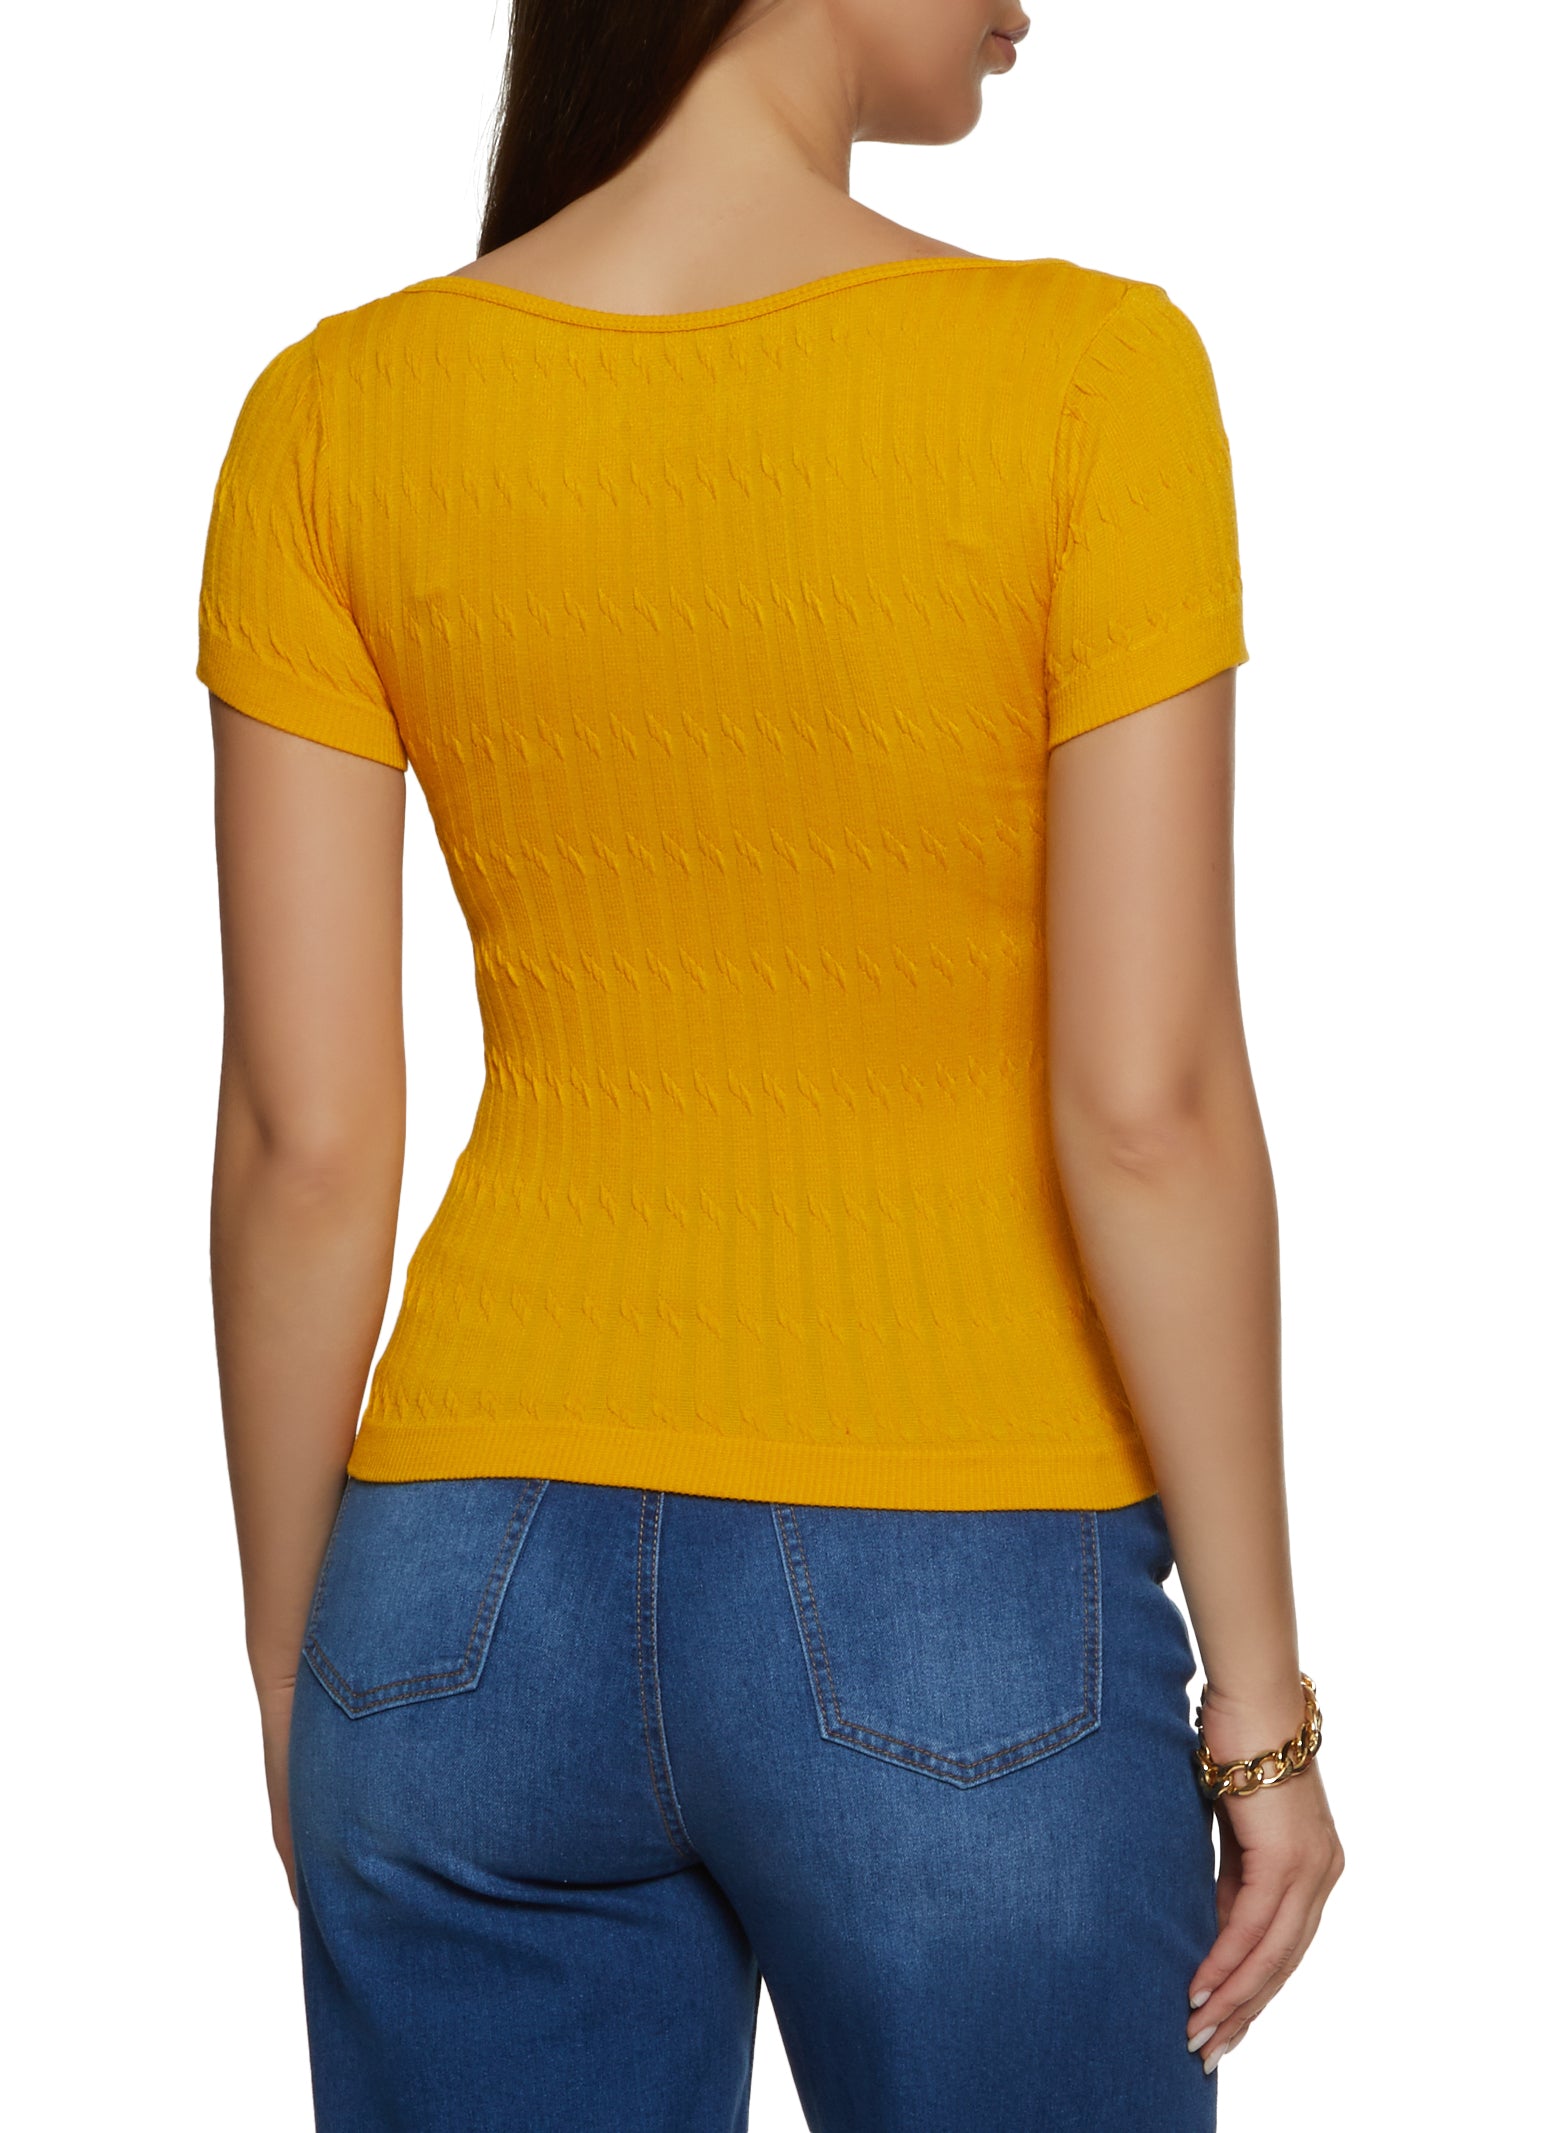 Seamless top with square neckline